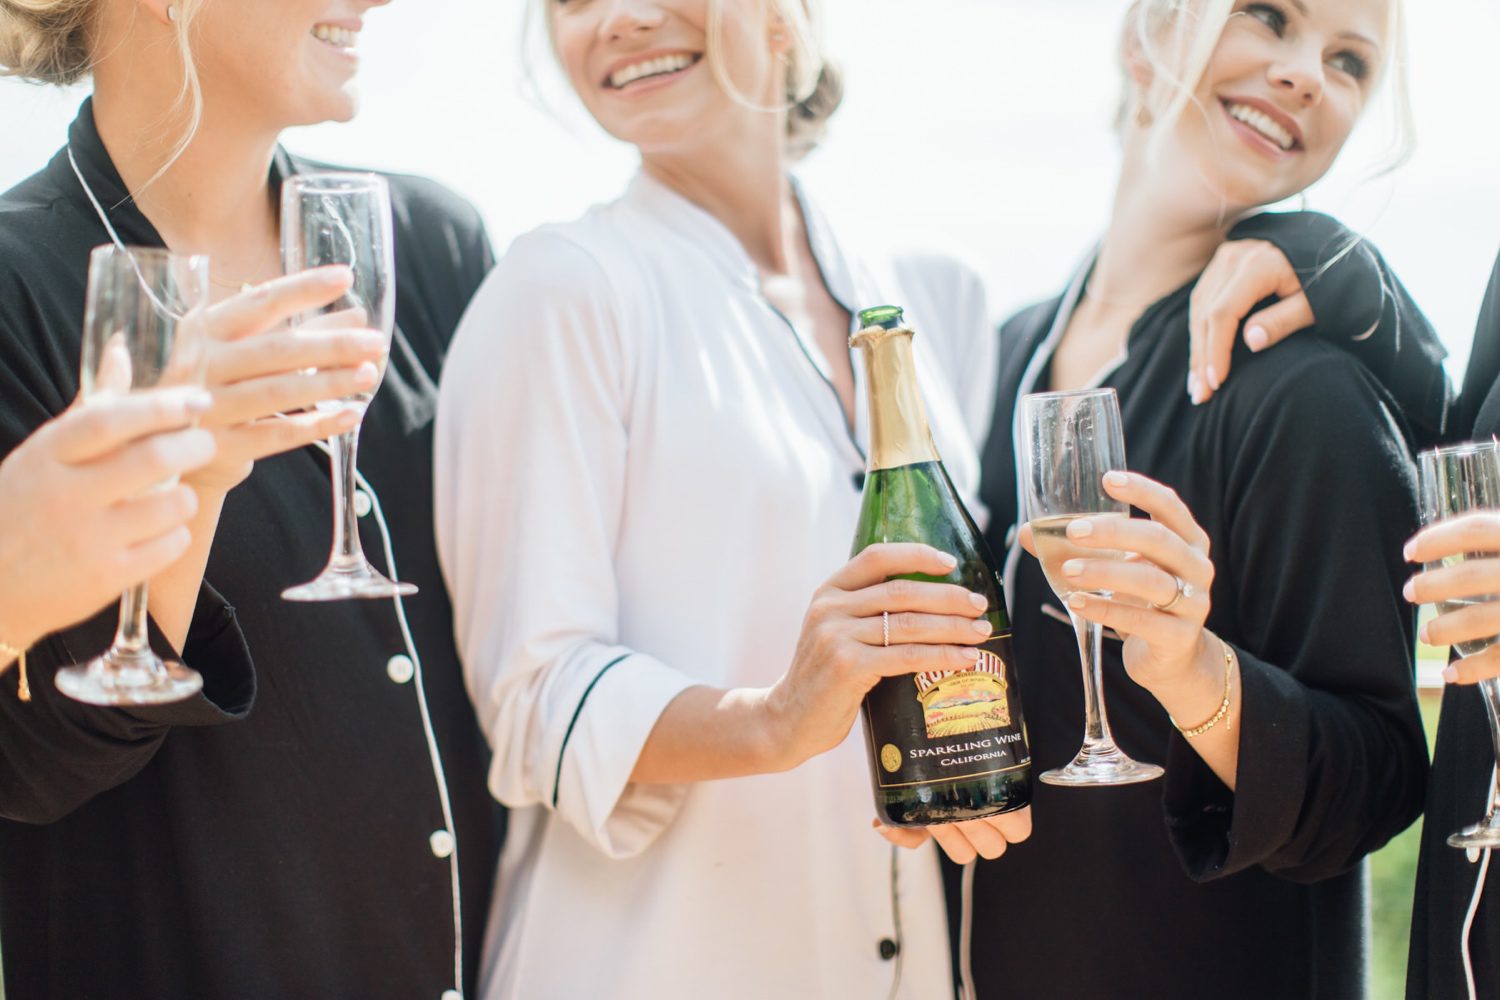 Bride drinking sparking wine with her bridesmaids dressed in matching black and white robes